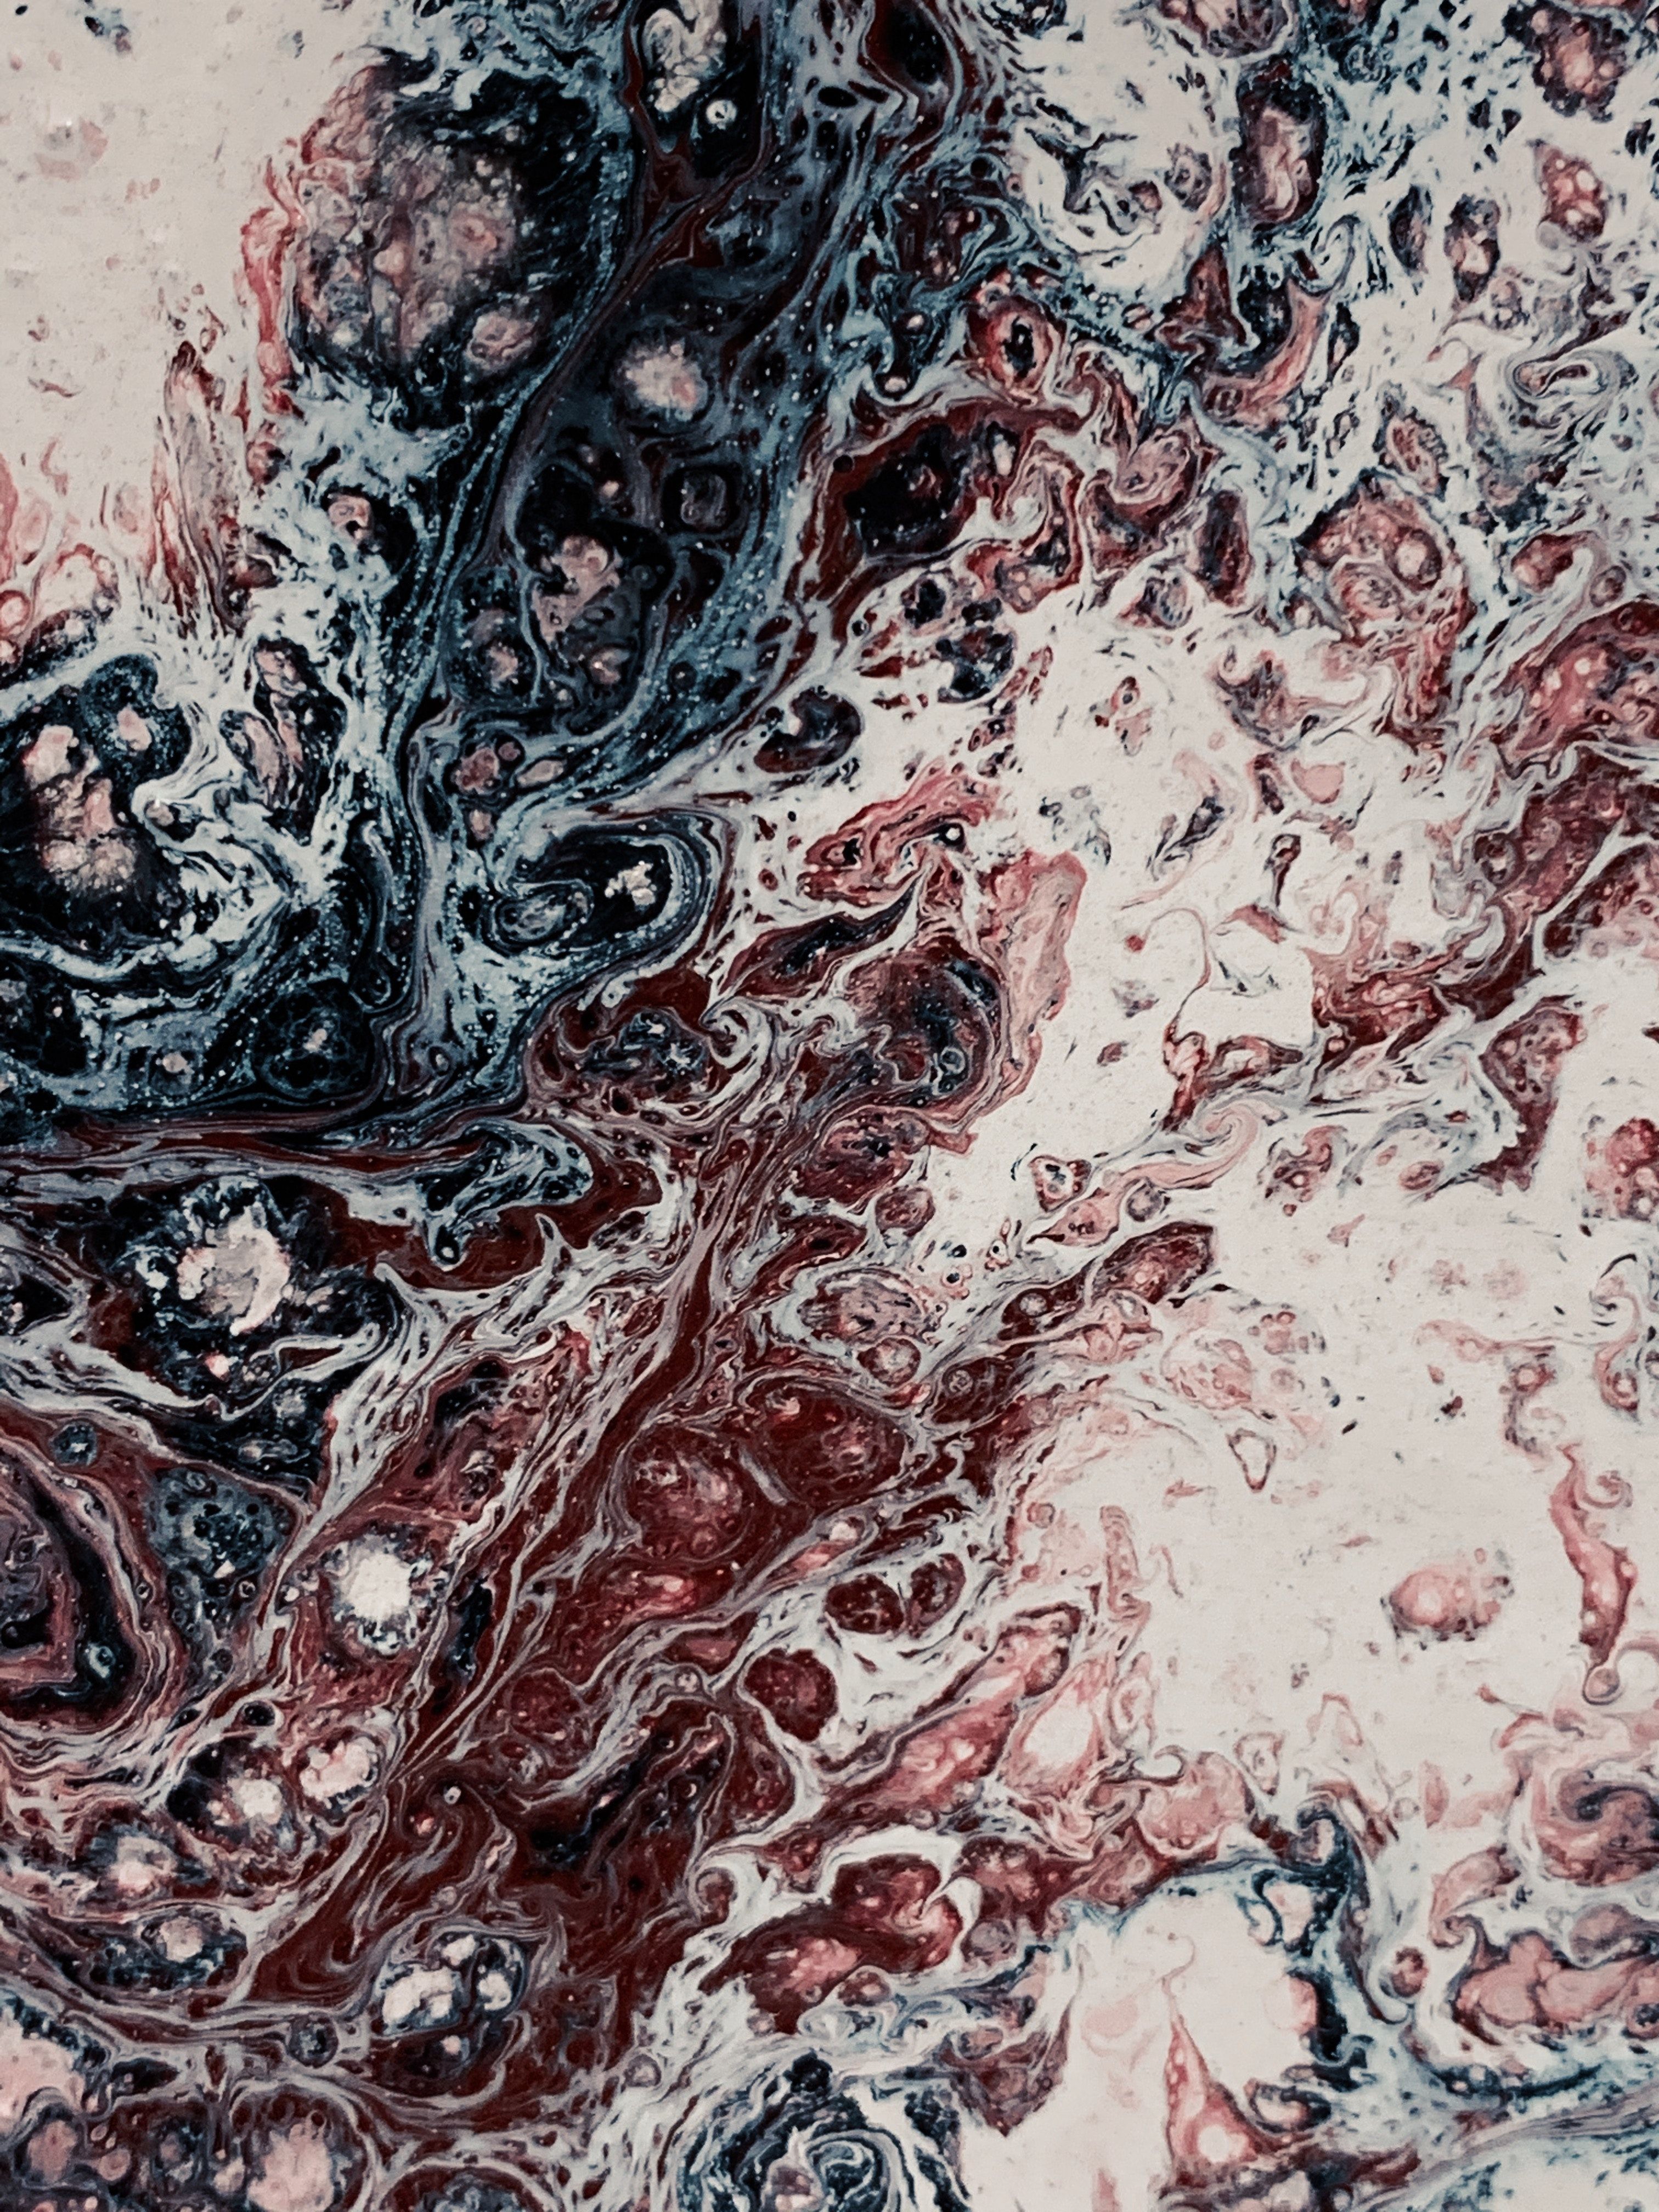 A photo of a painting with red, white, and black paint. - Abstract, pattern